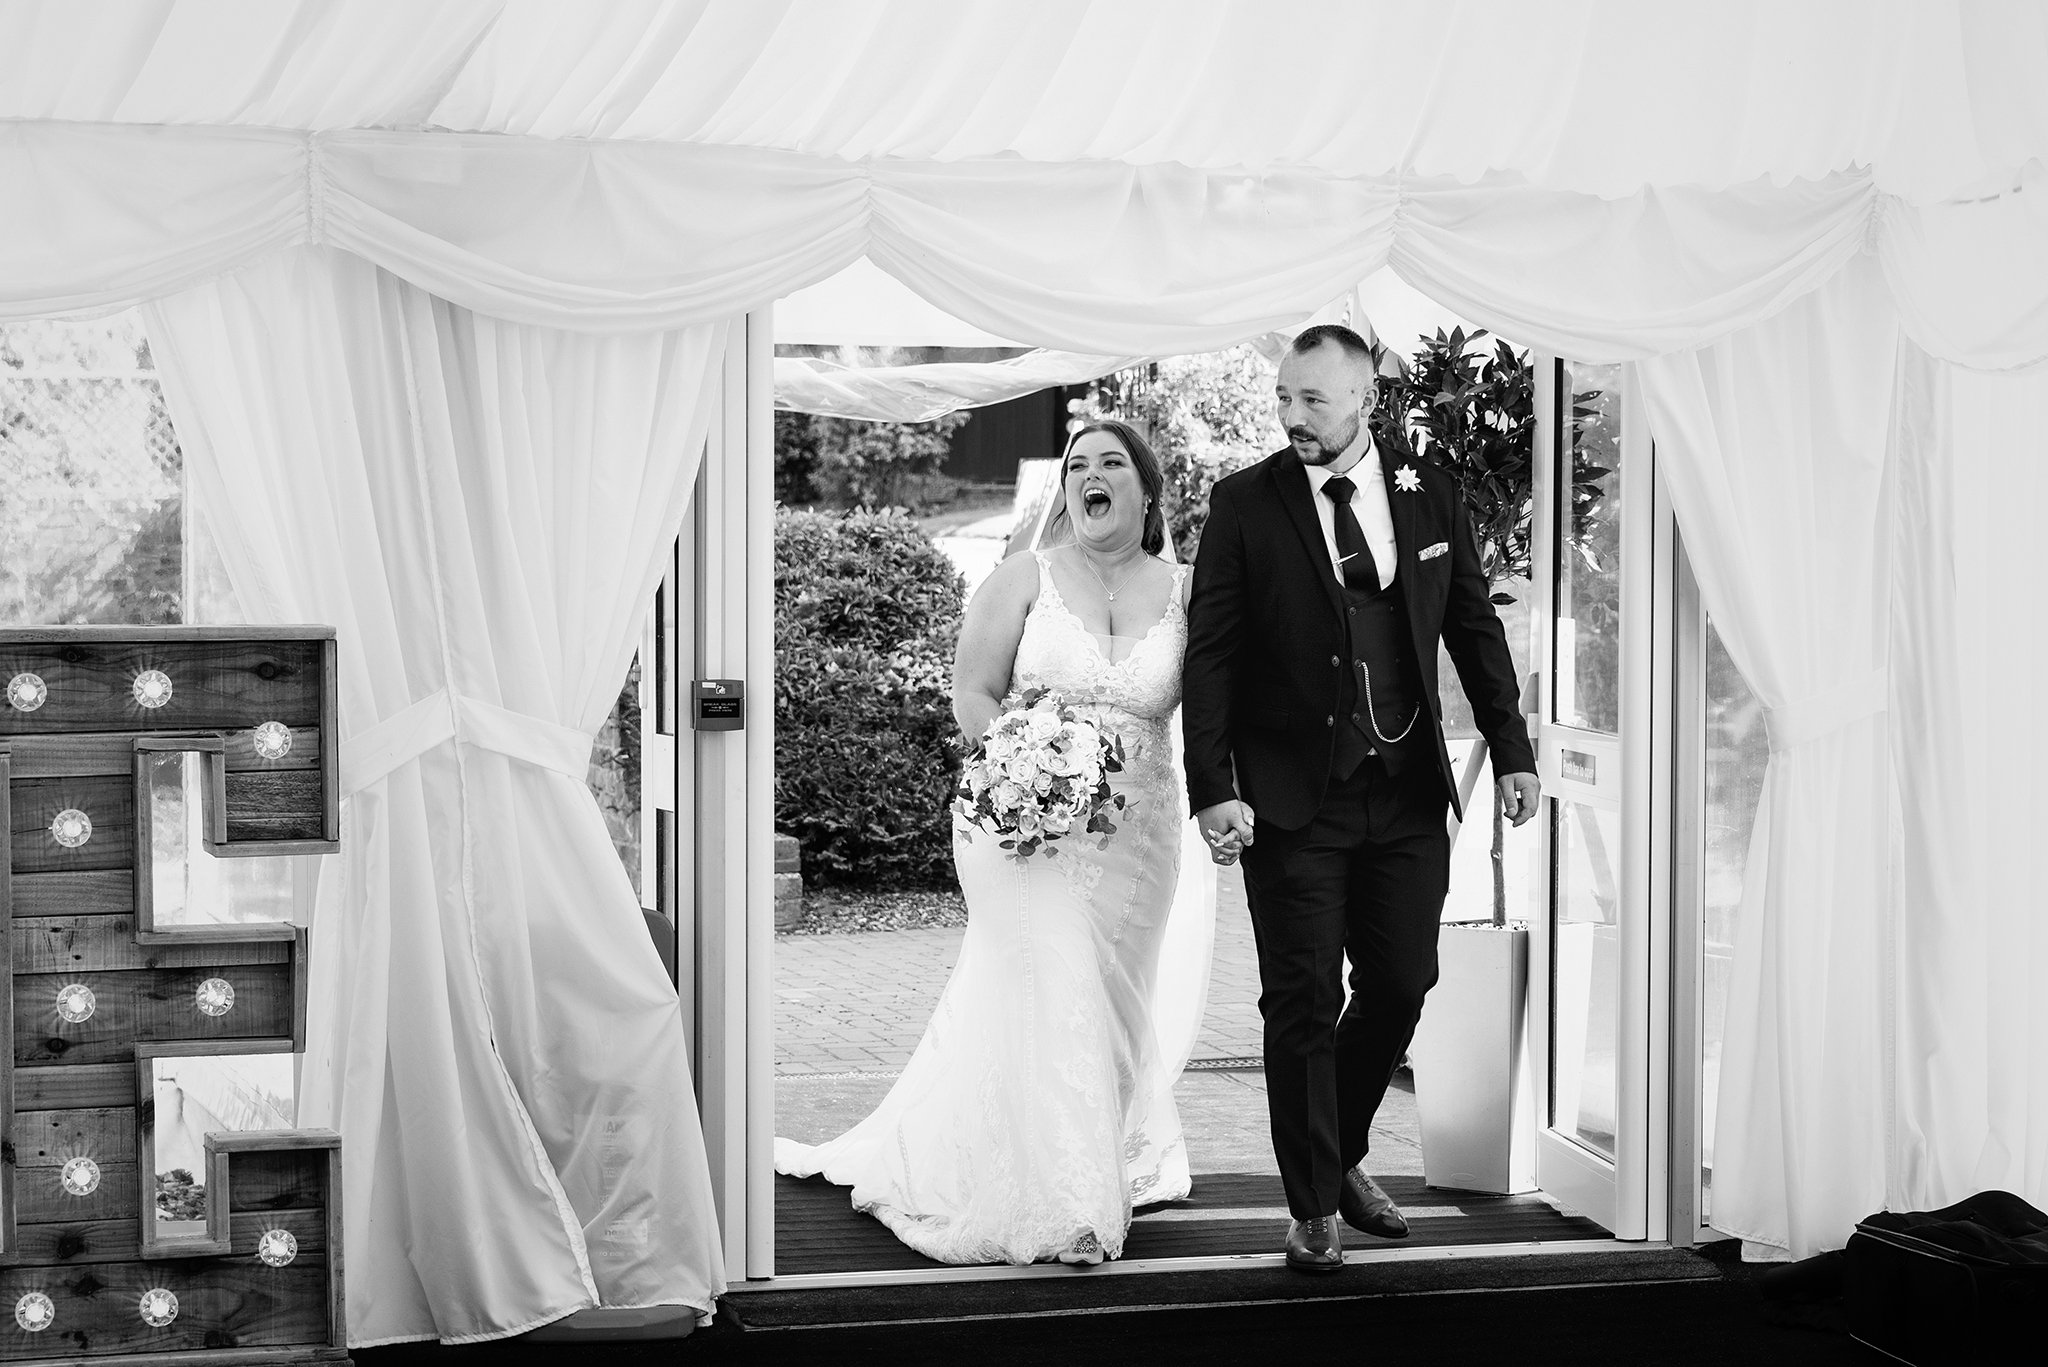  A bride and groom entering their wedding reception at the Shropshire golf club in Muxton 